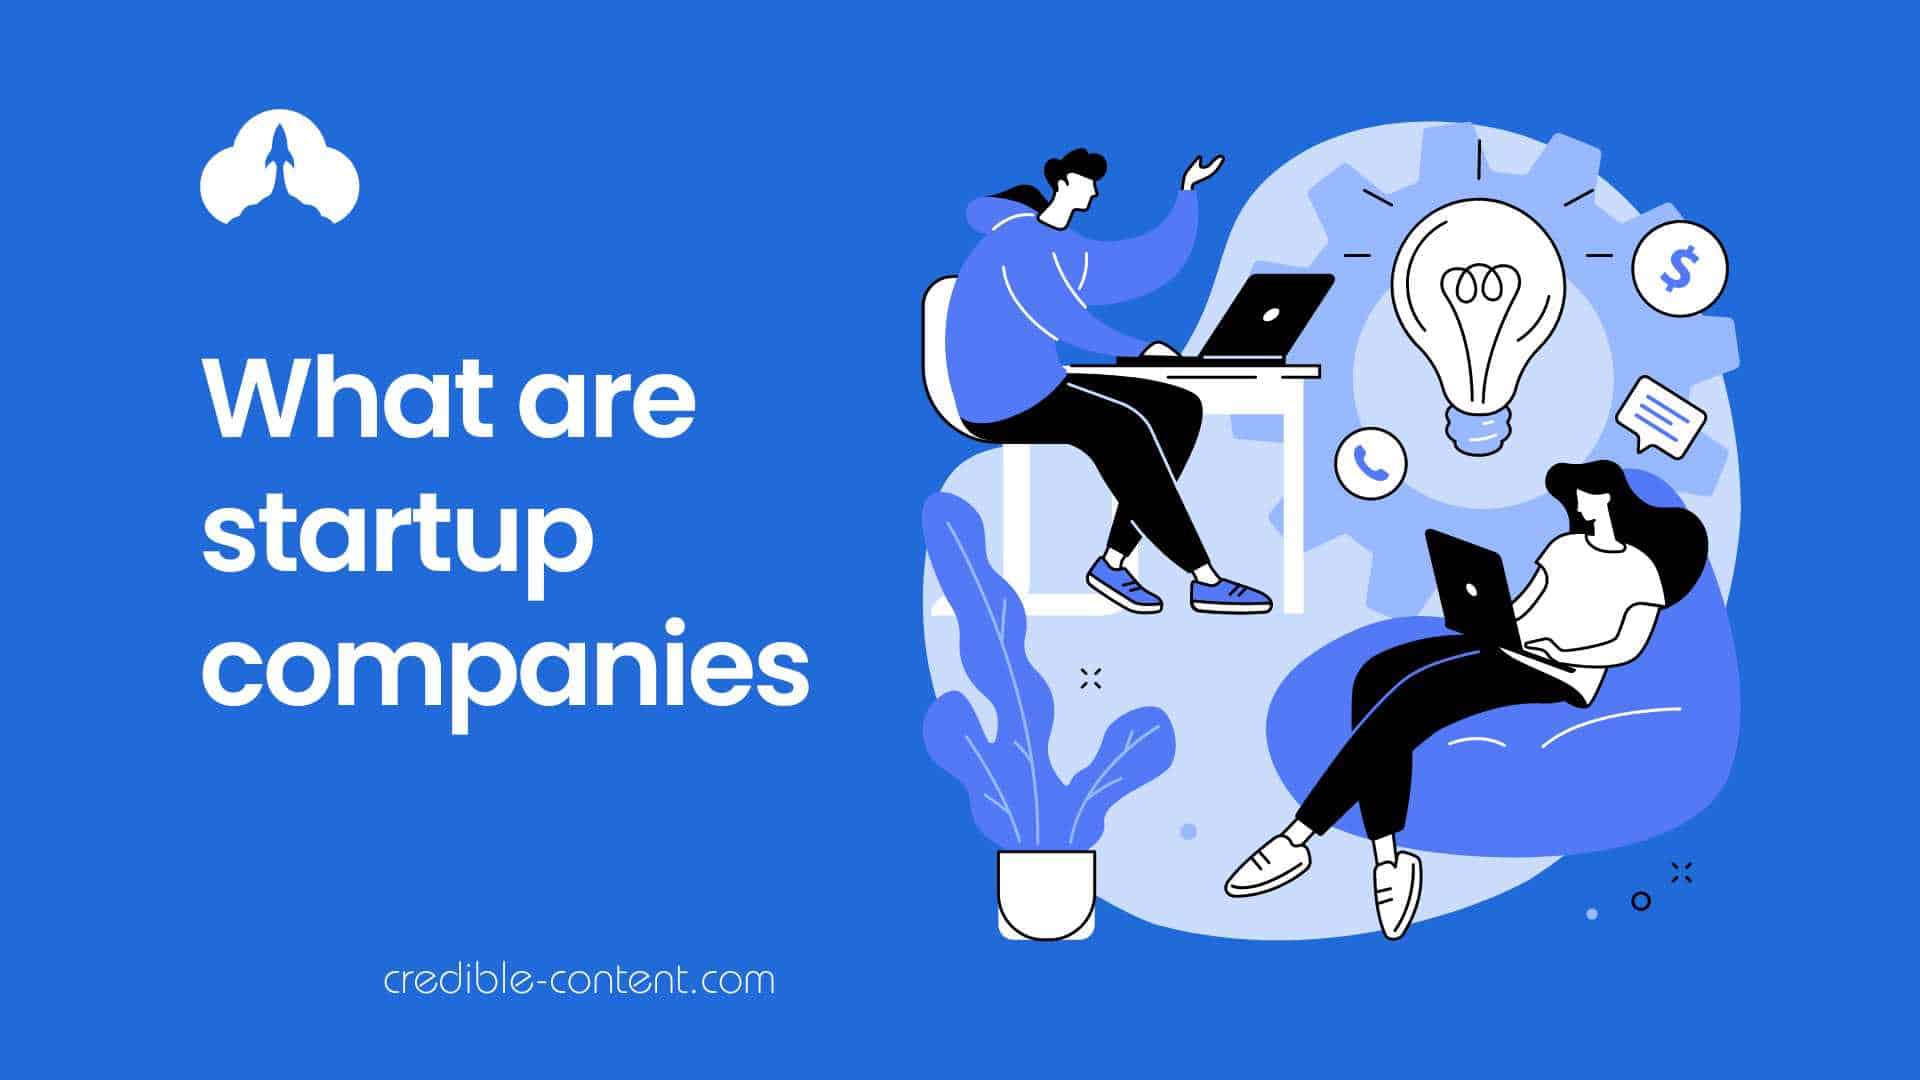 What a startup companies